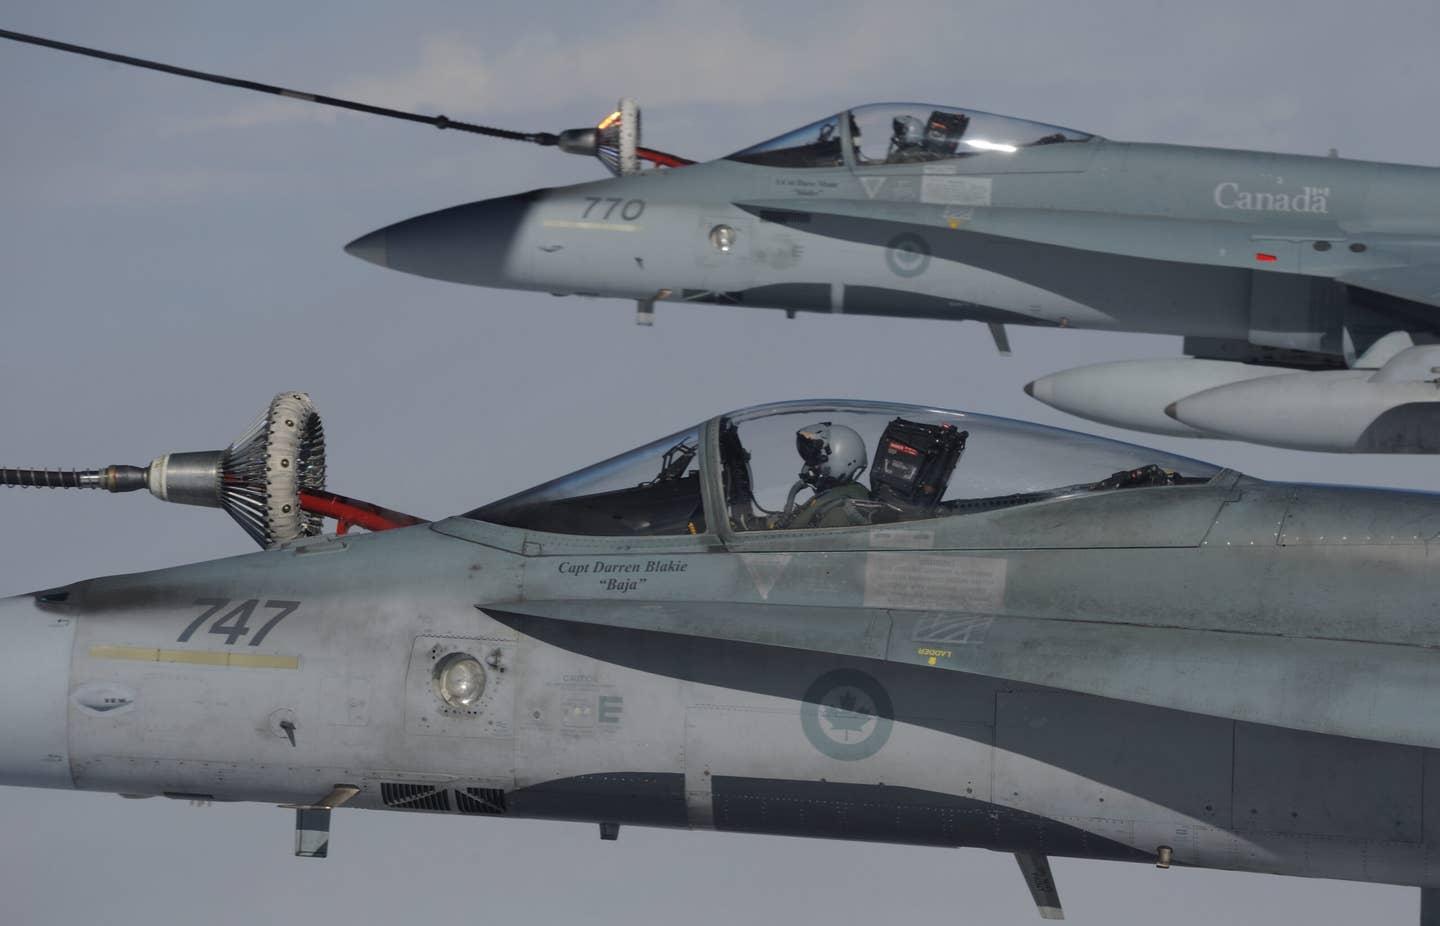 CF-18 Hornet fighters from 409 Squadron in Cold Lake, Alberta, are refueled in the air during Exercise Vigilant Eagle 13 in August 2013. <em>RCAF</em>